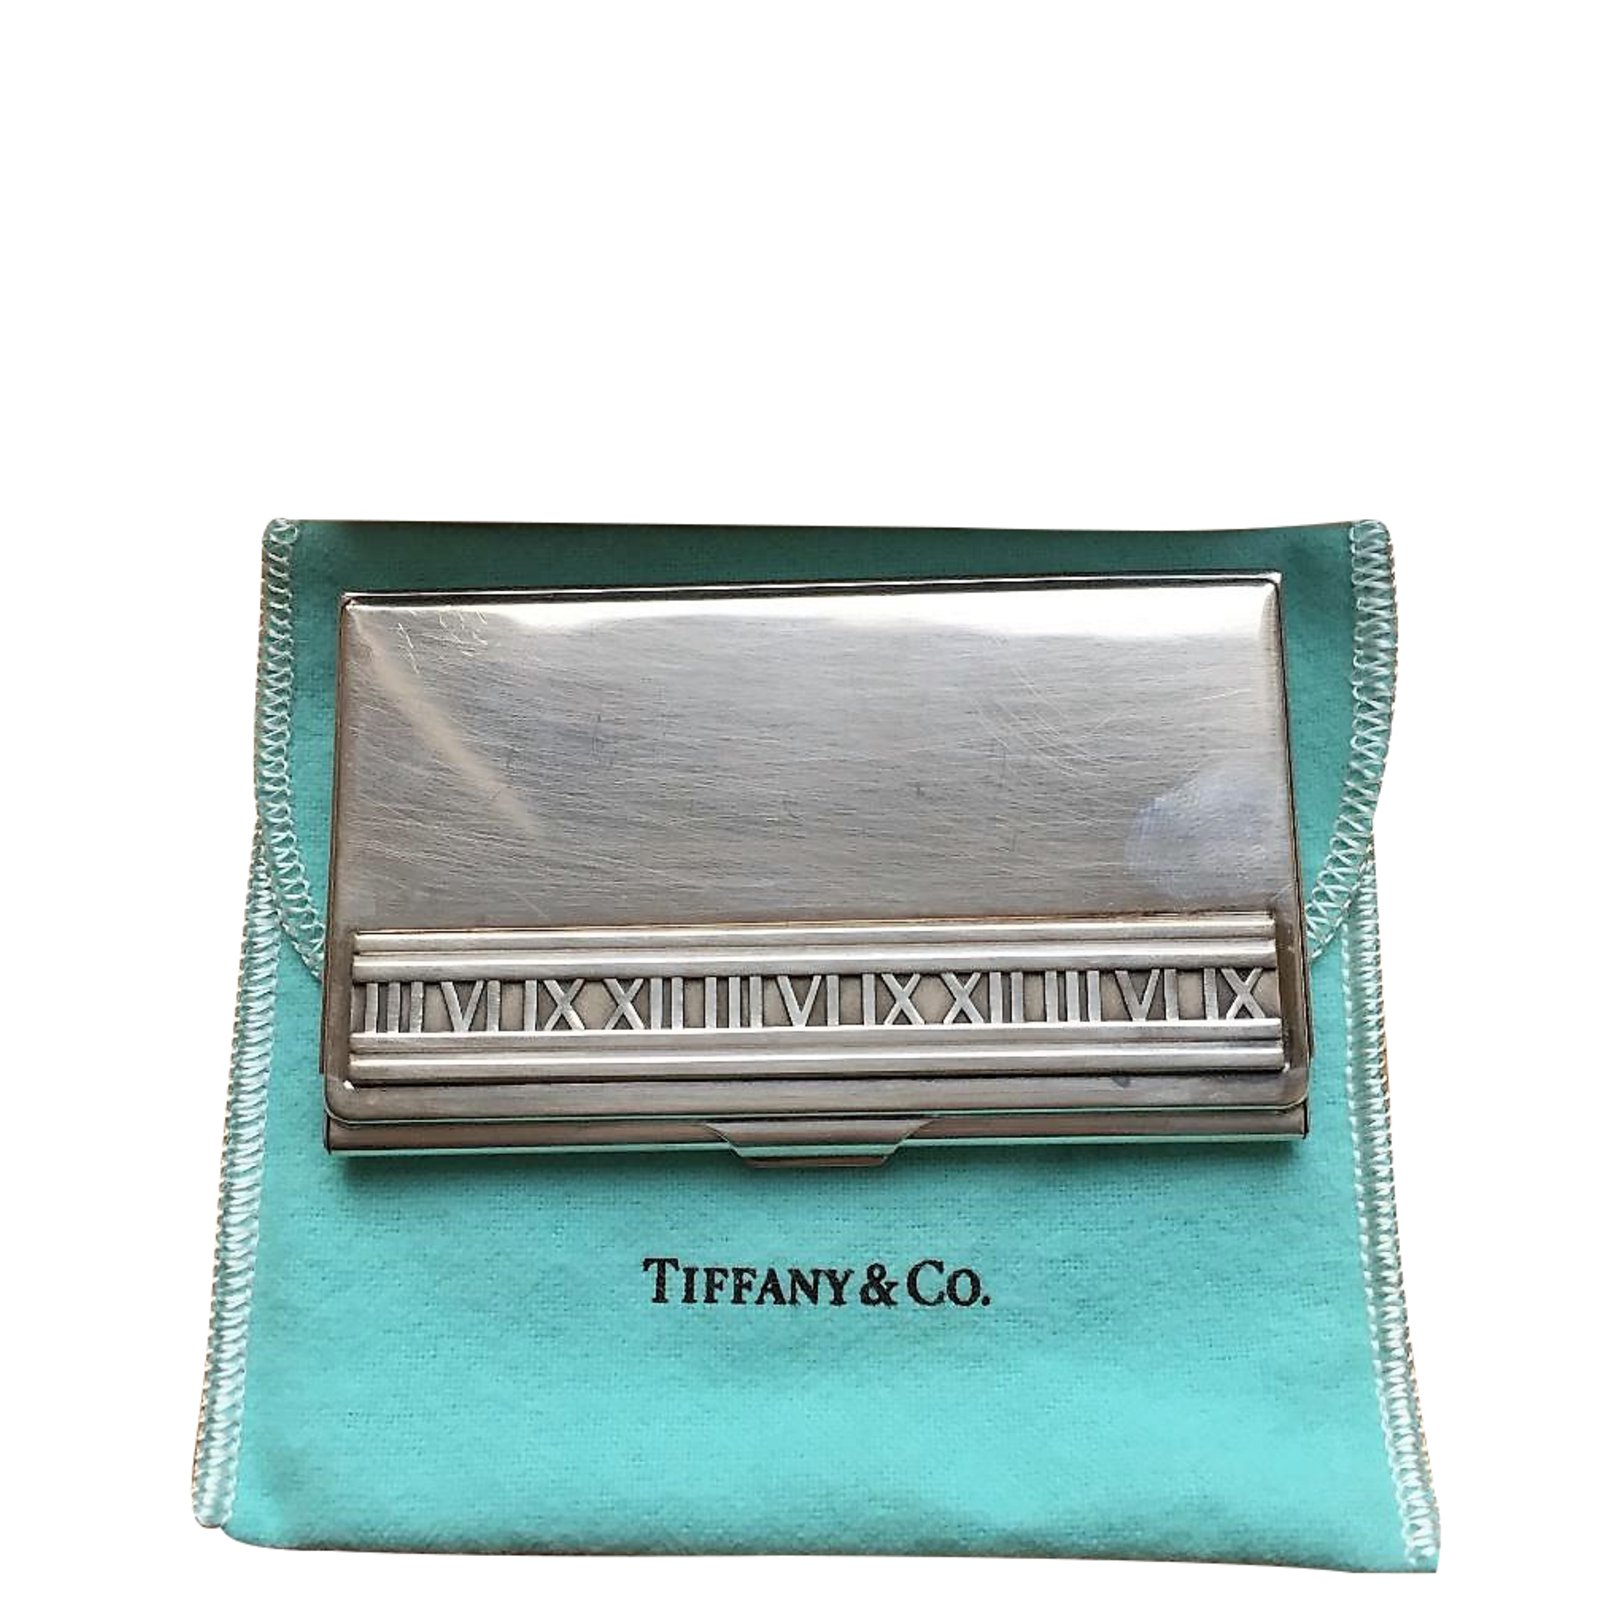 tiffany's business card holder